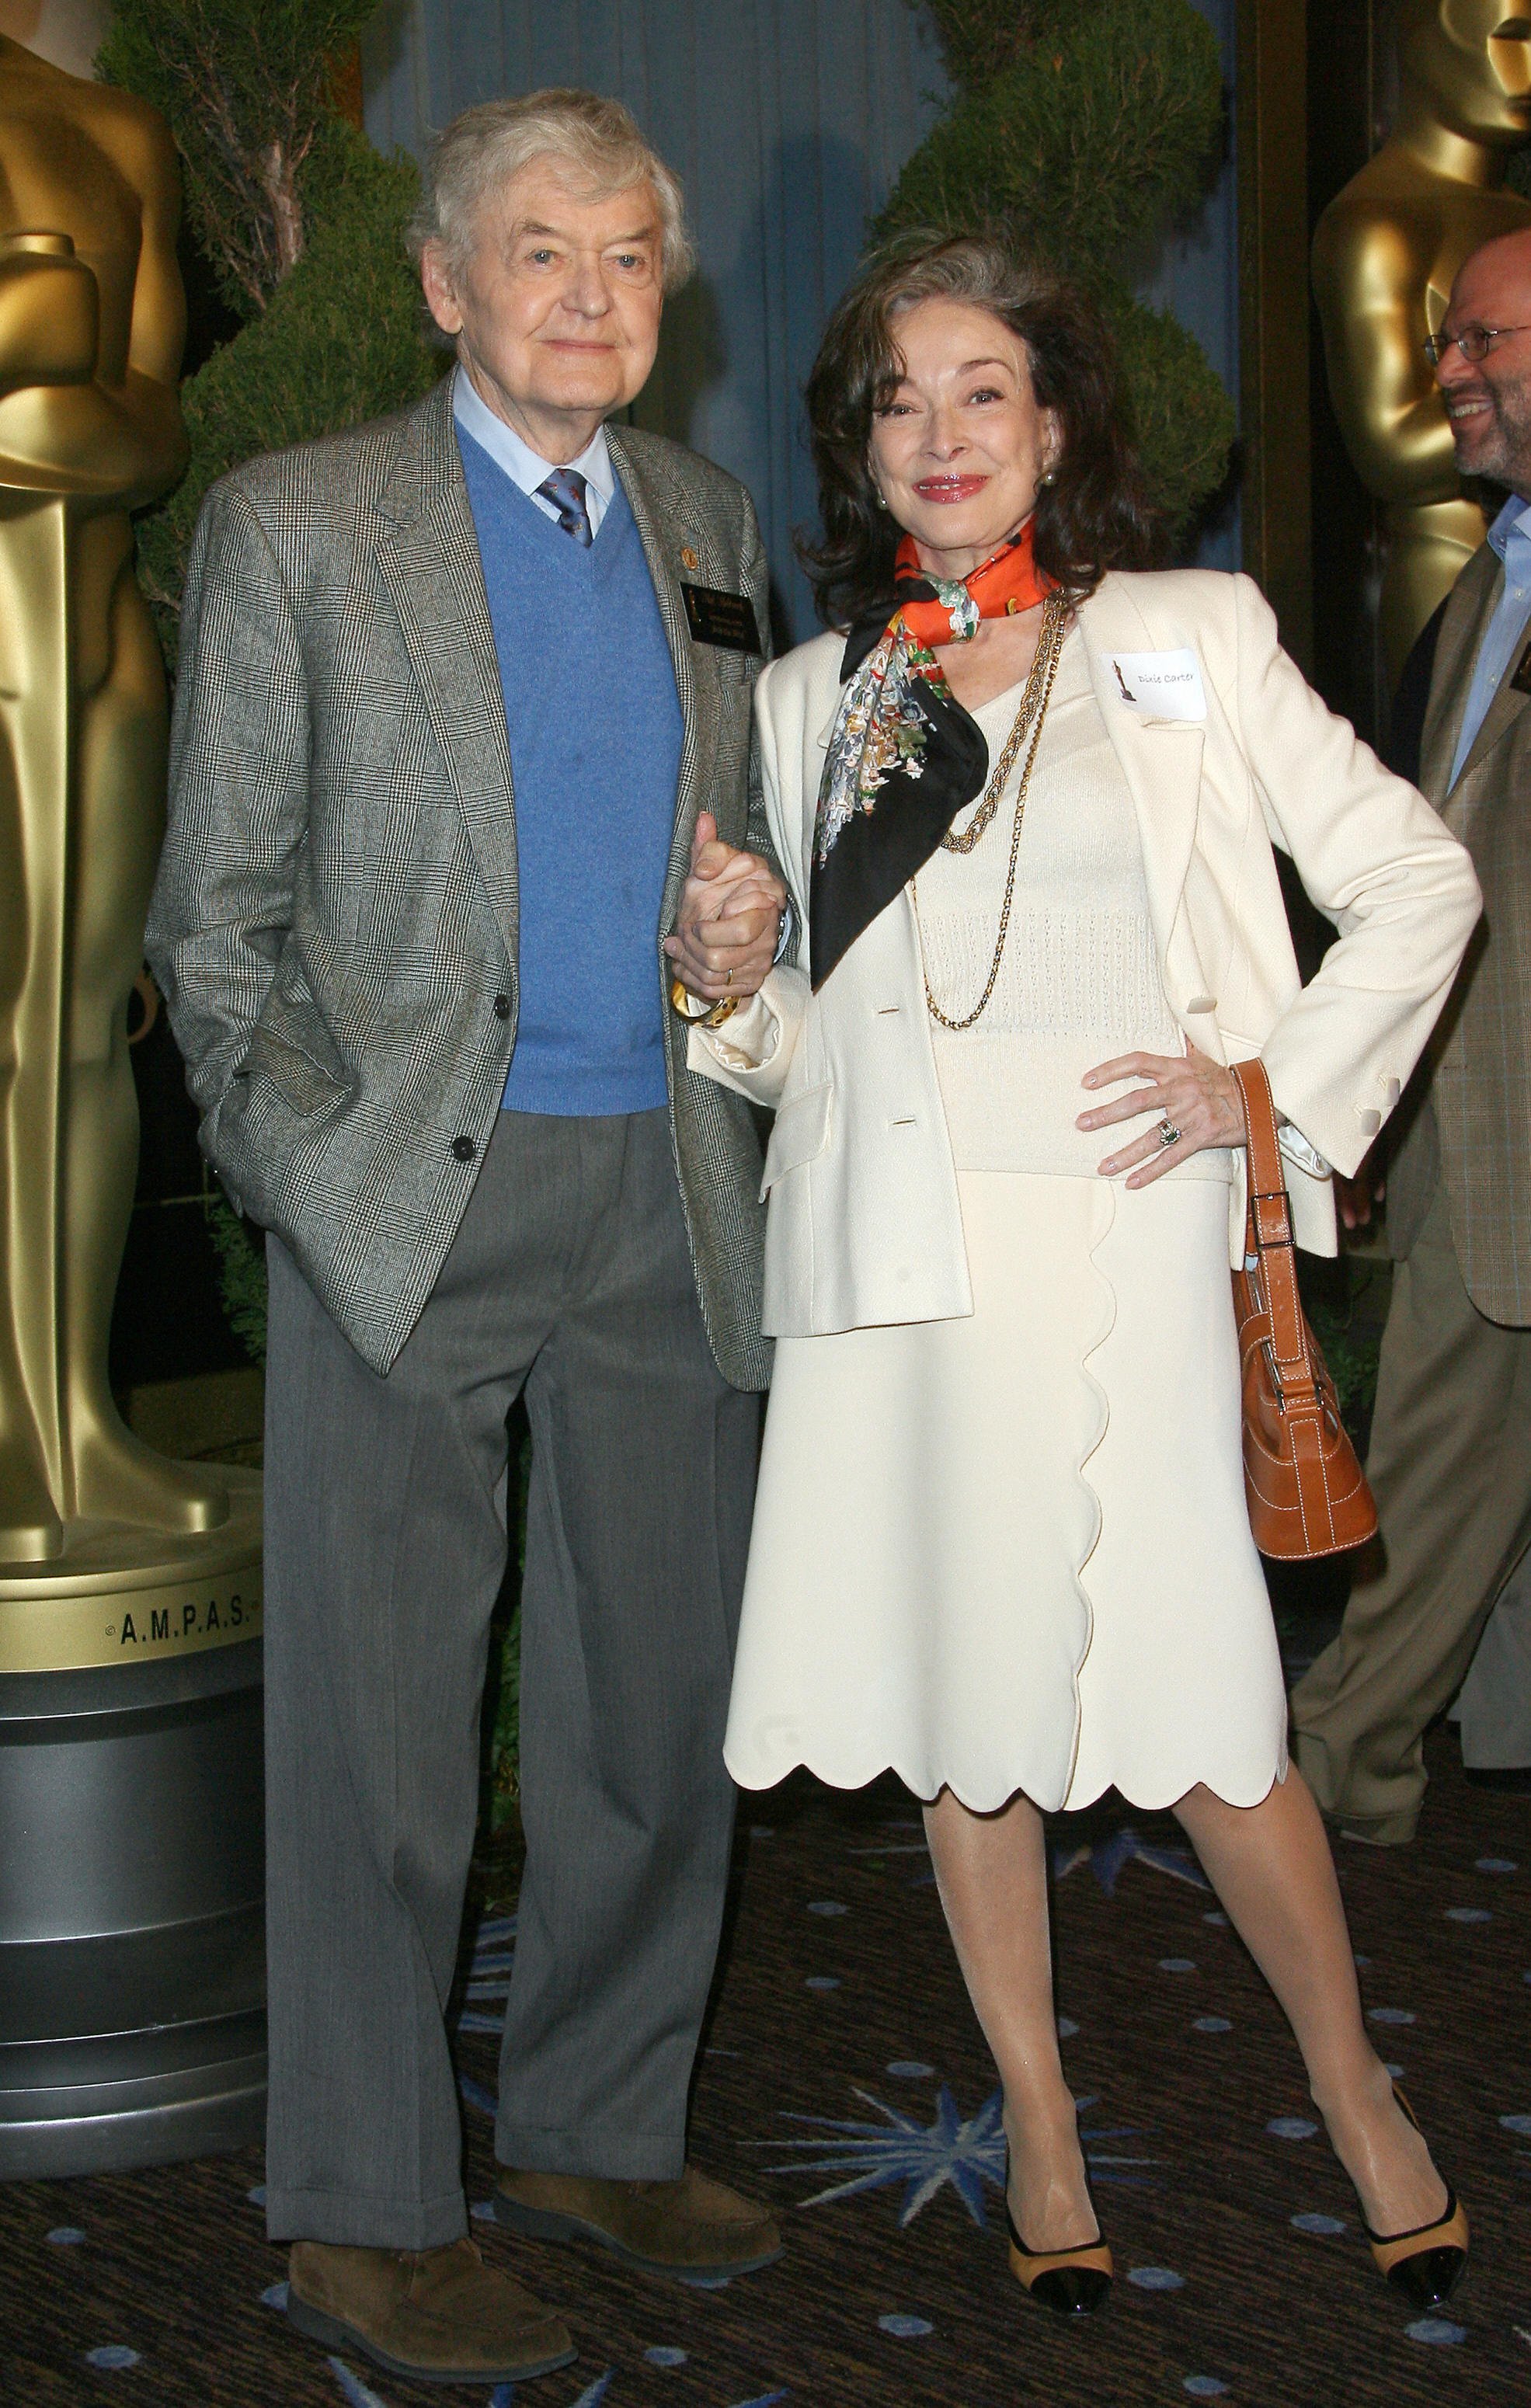 Actors Hal Holbrook and Dixie Carter arrive for the annual Academy nominees luncheon February 04, 2008 | Source: Getty Images